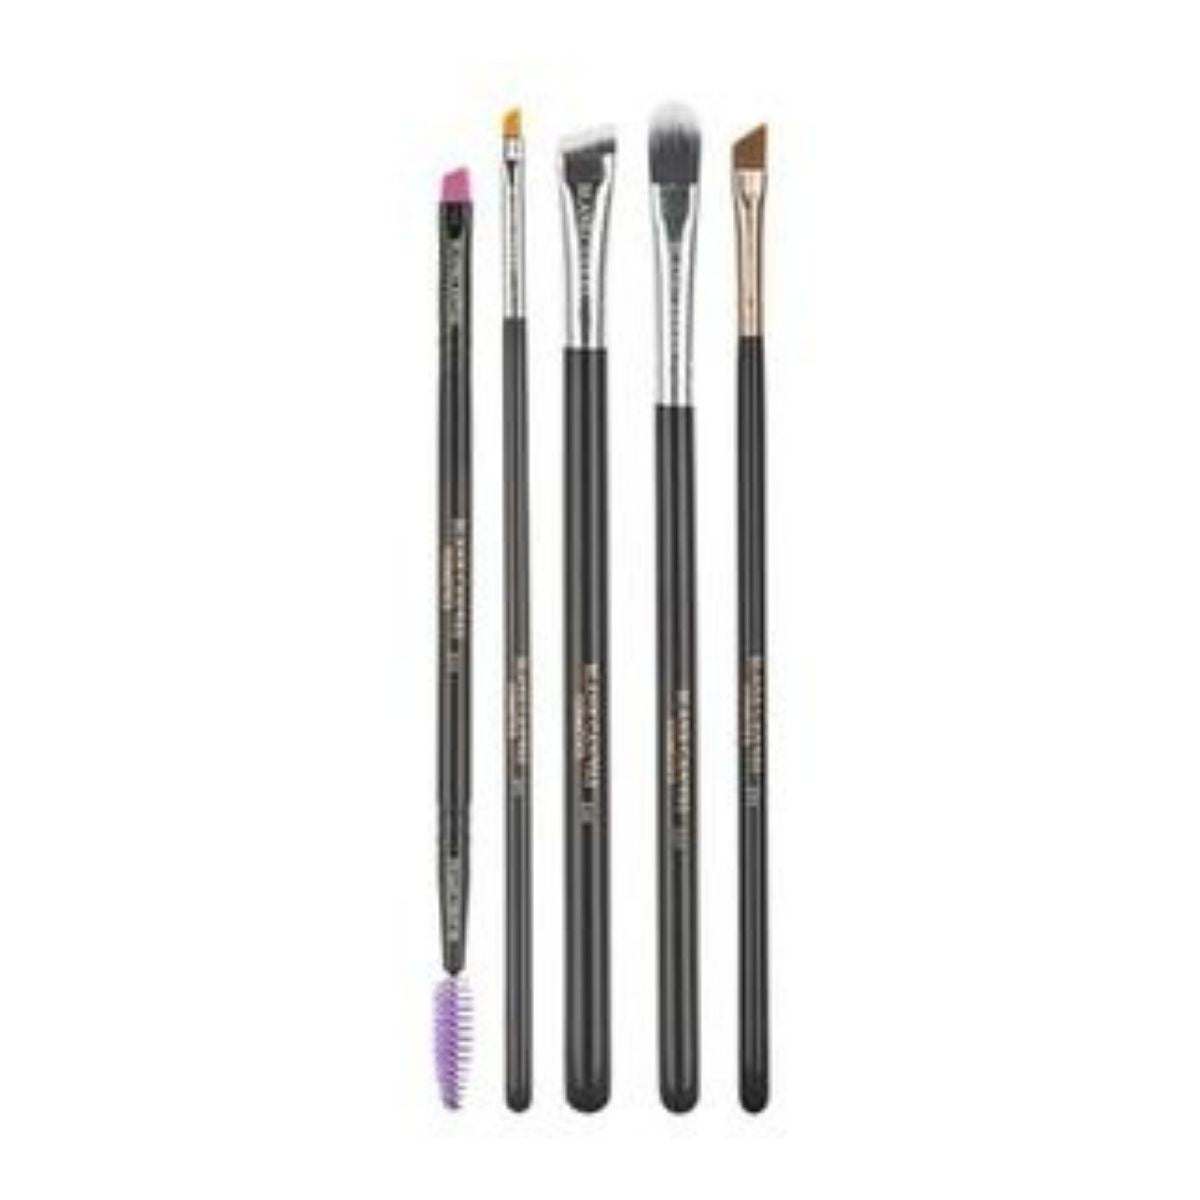 Blank Canvas One Stop Brow Brush Set.